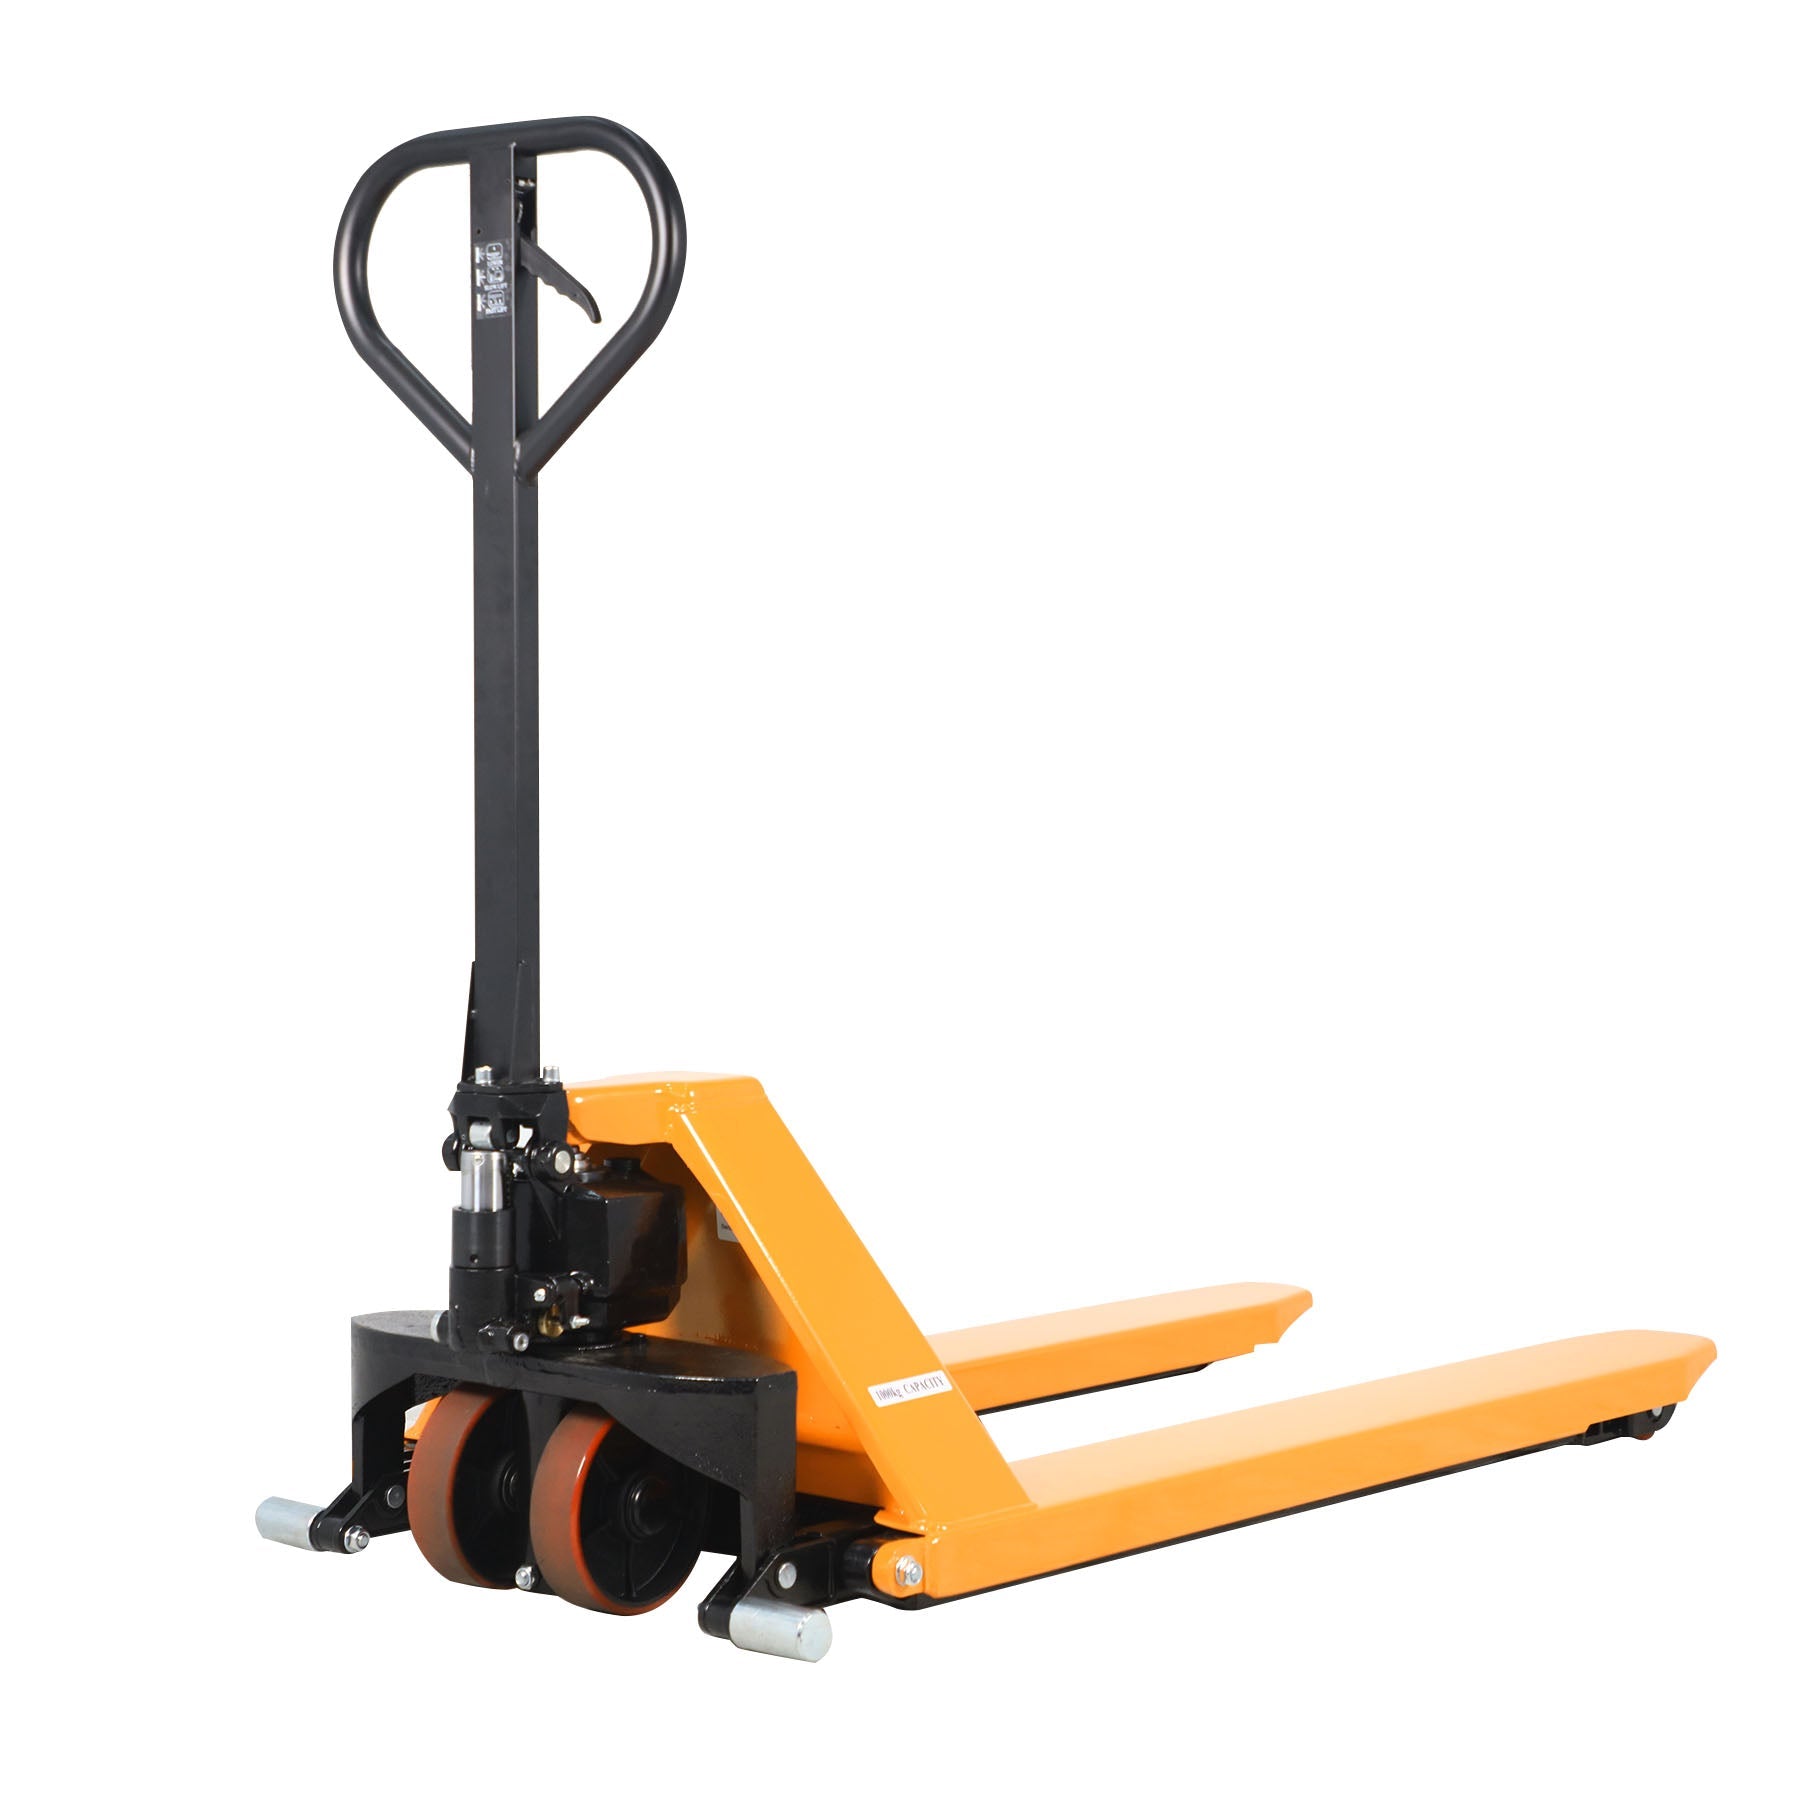 Apollolift Pallet Jack Lift 2200lbs. 45"Lx21"W Fork 3.3'' lowered. 31.5'' raised A-1014